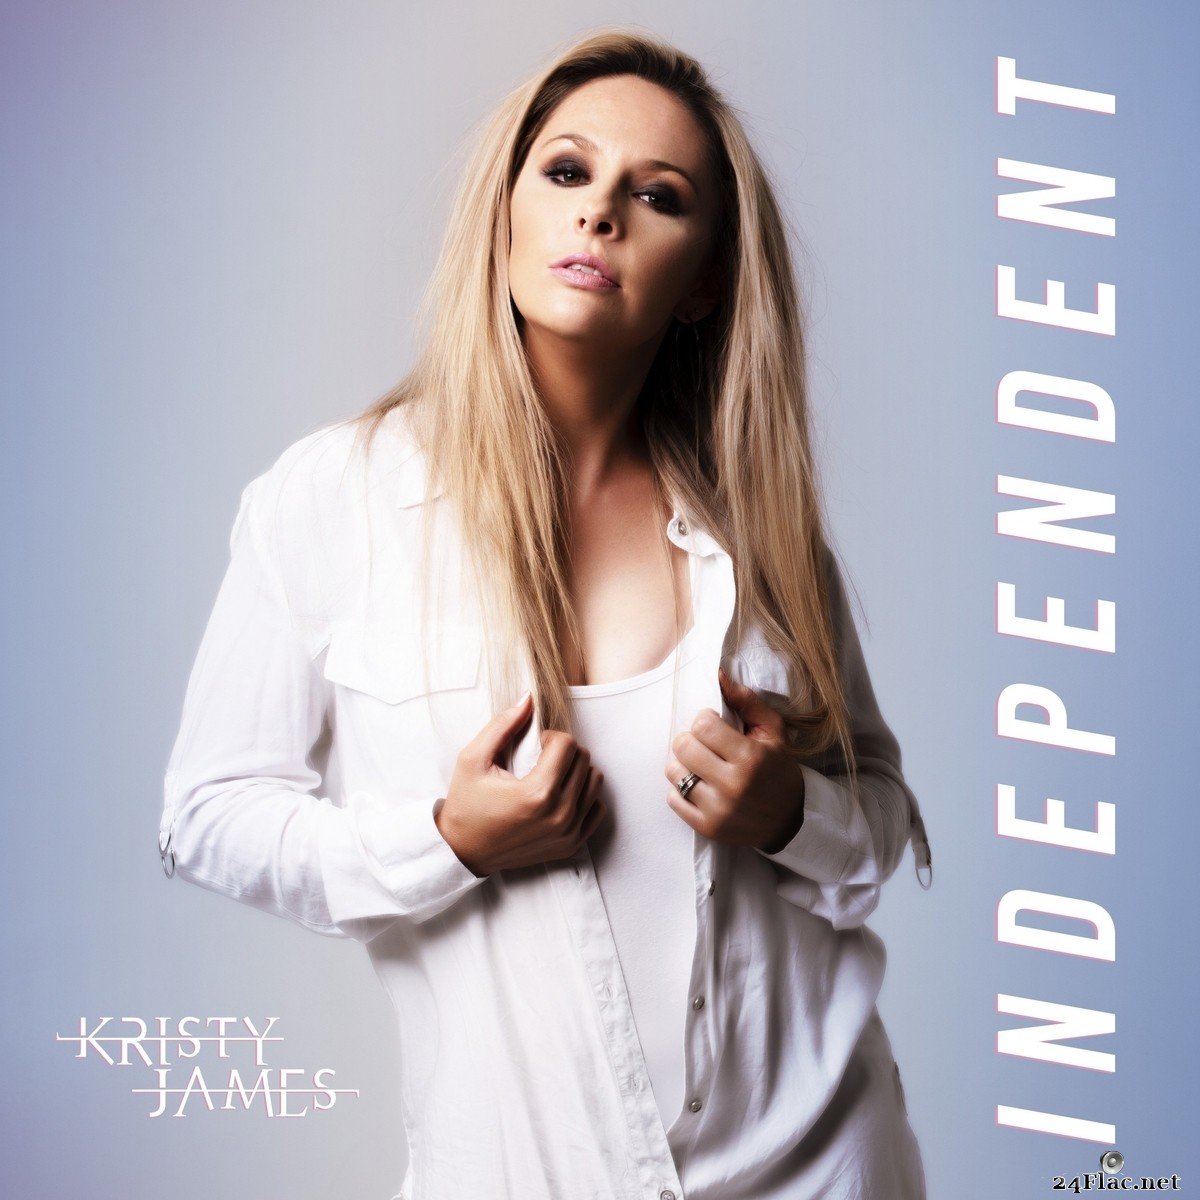 Kristy James - Independent (2021) FLAC